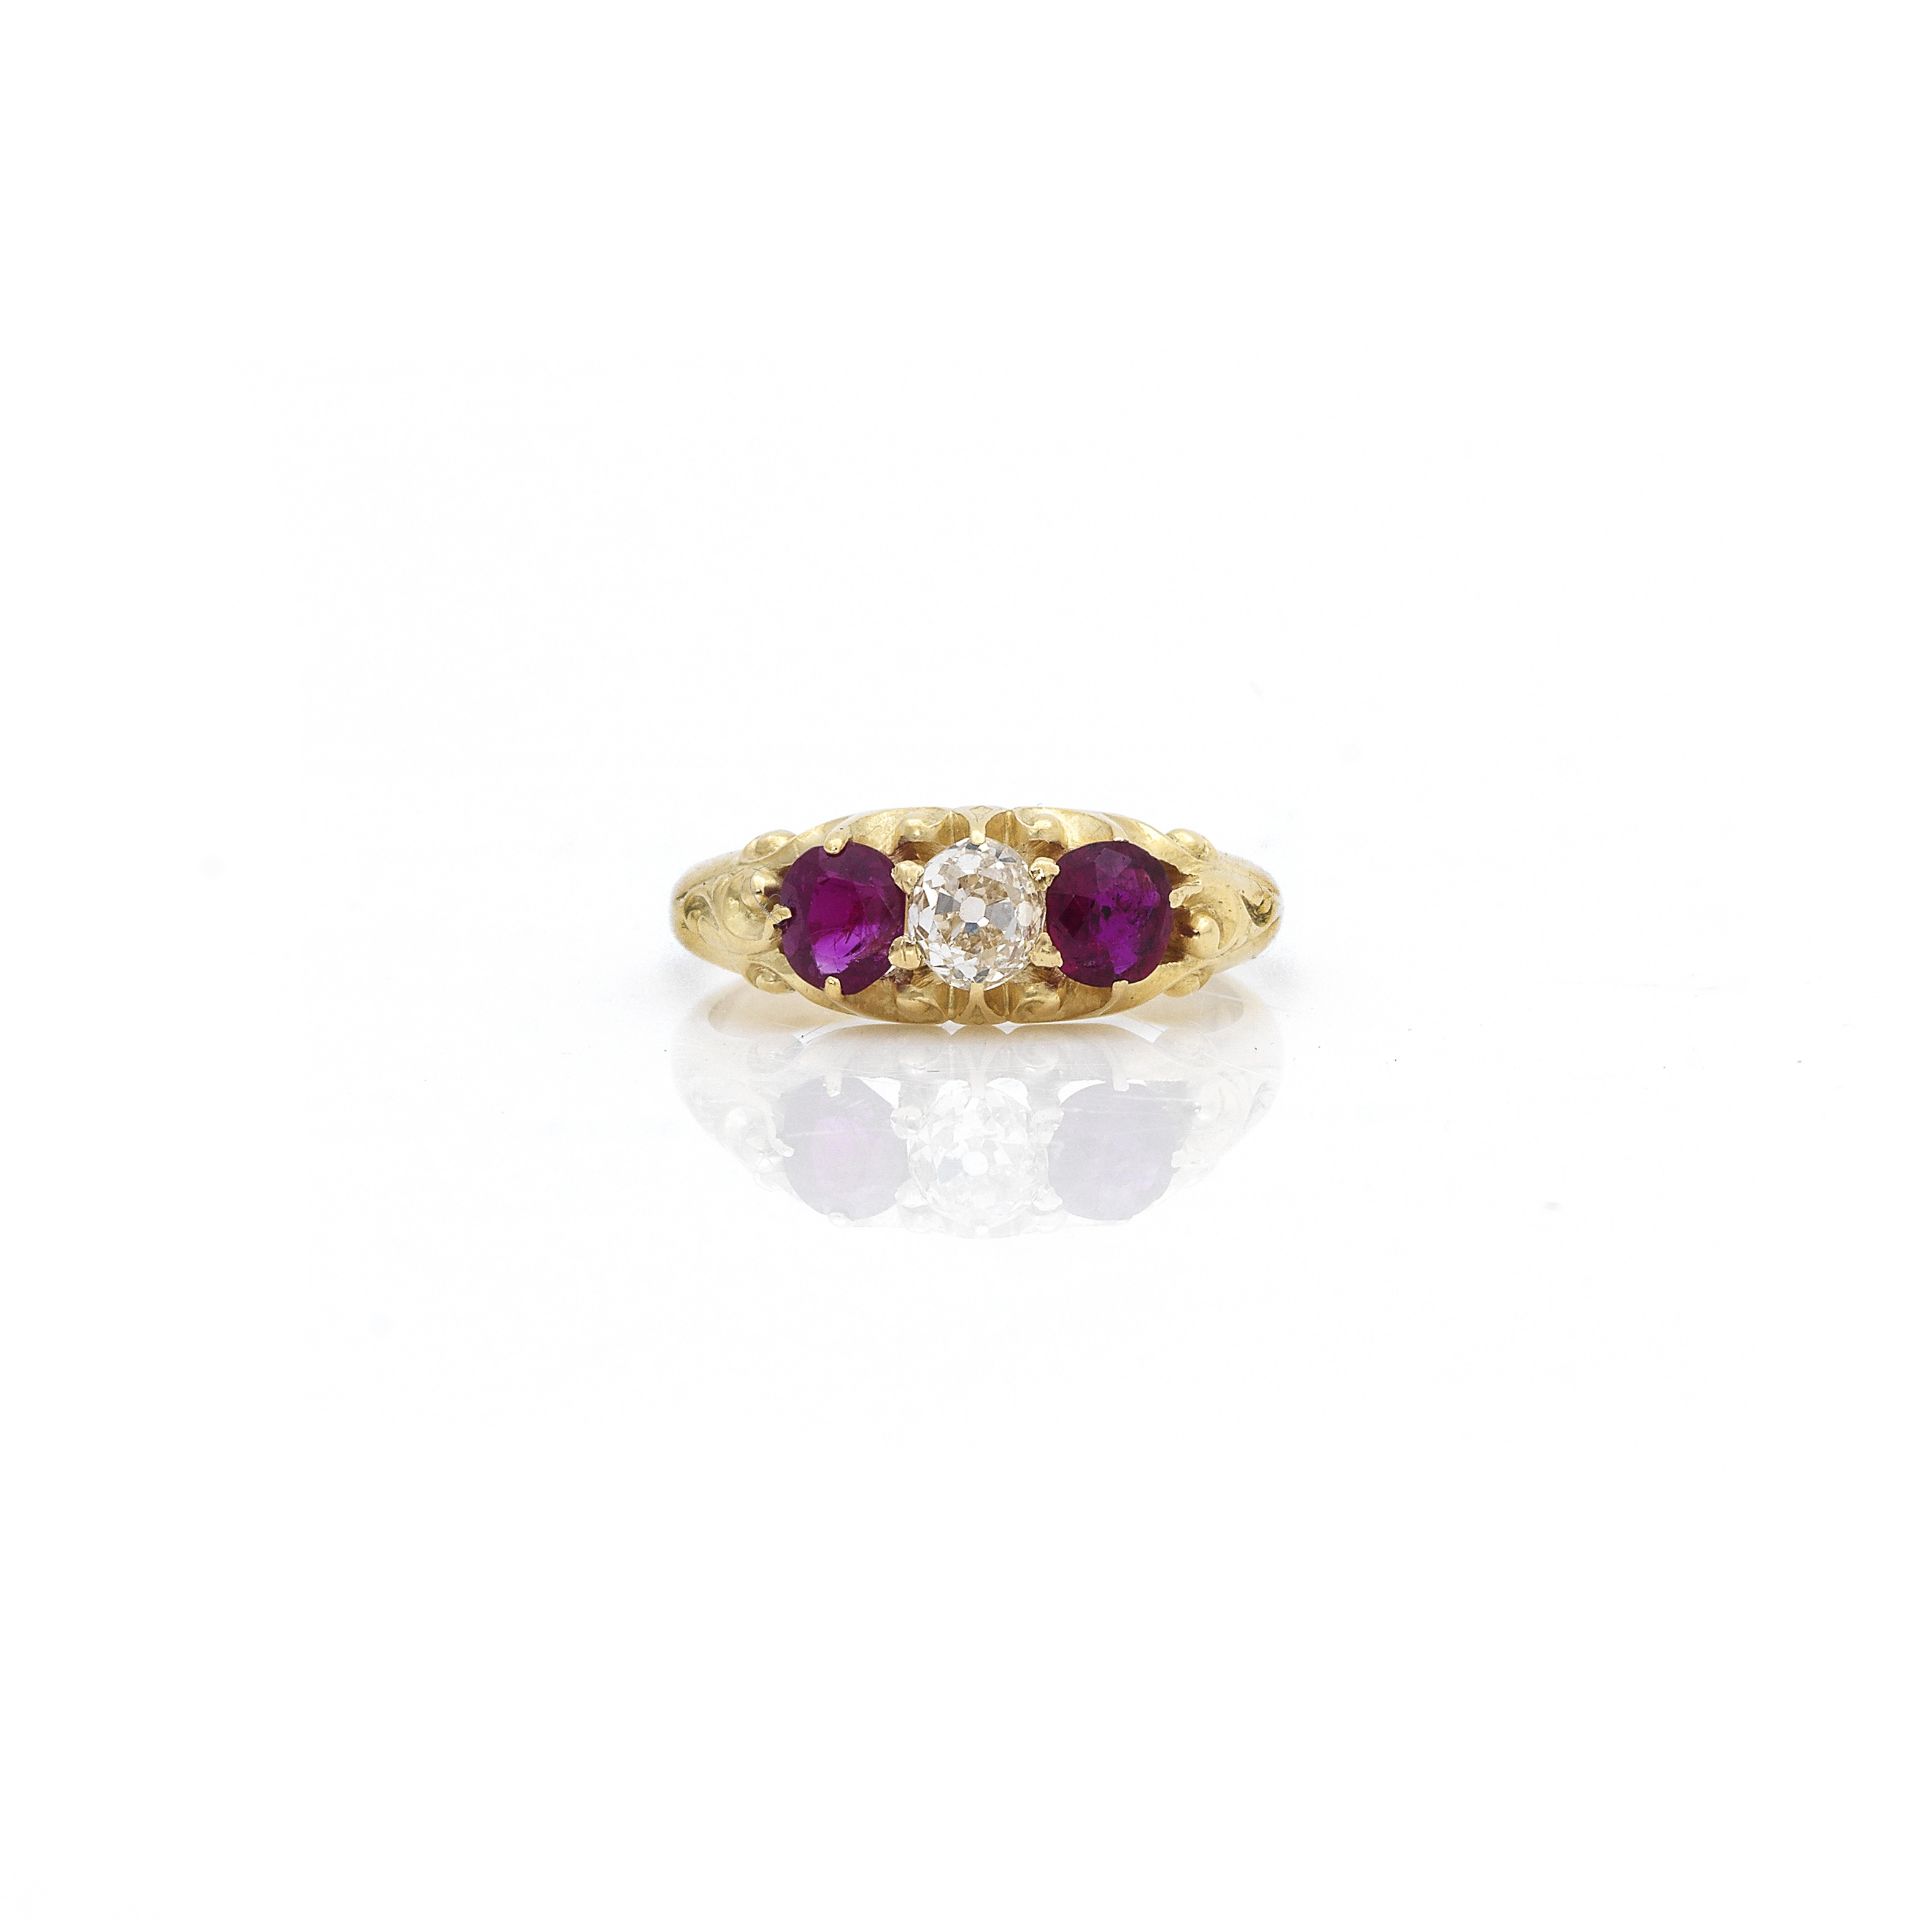 A ruby and diamond three-stone ring, late Victorian